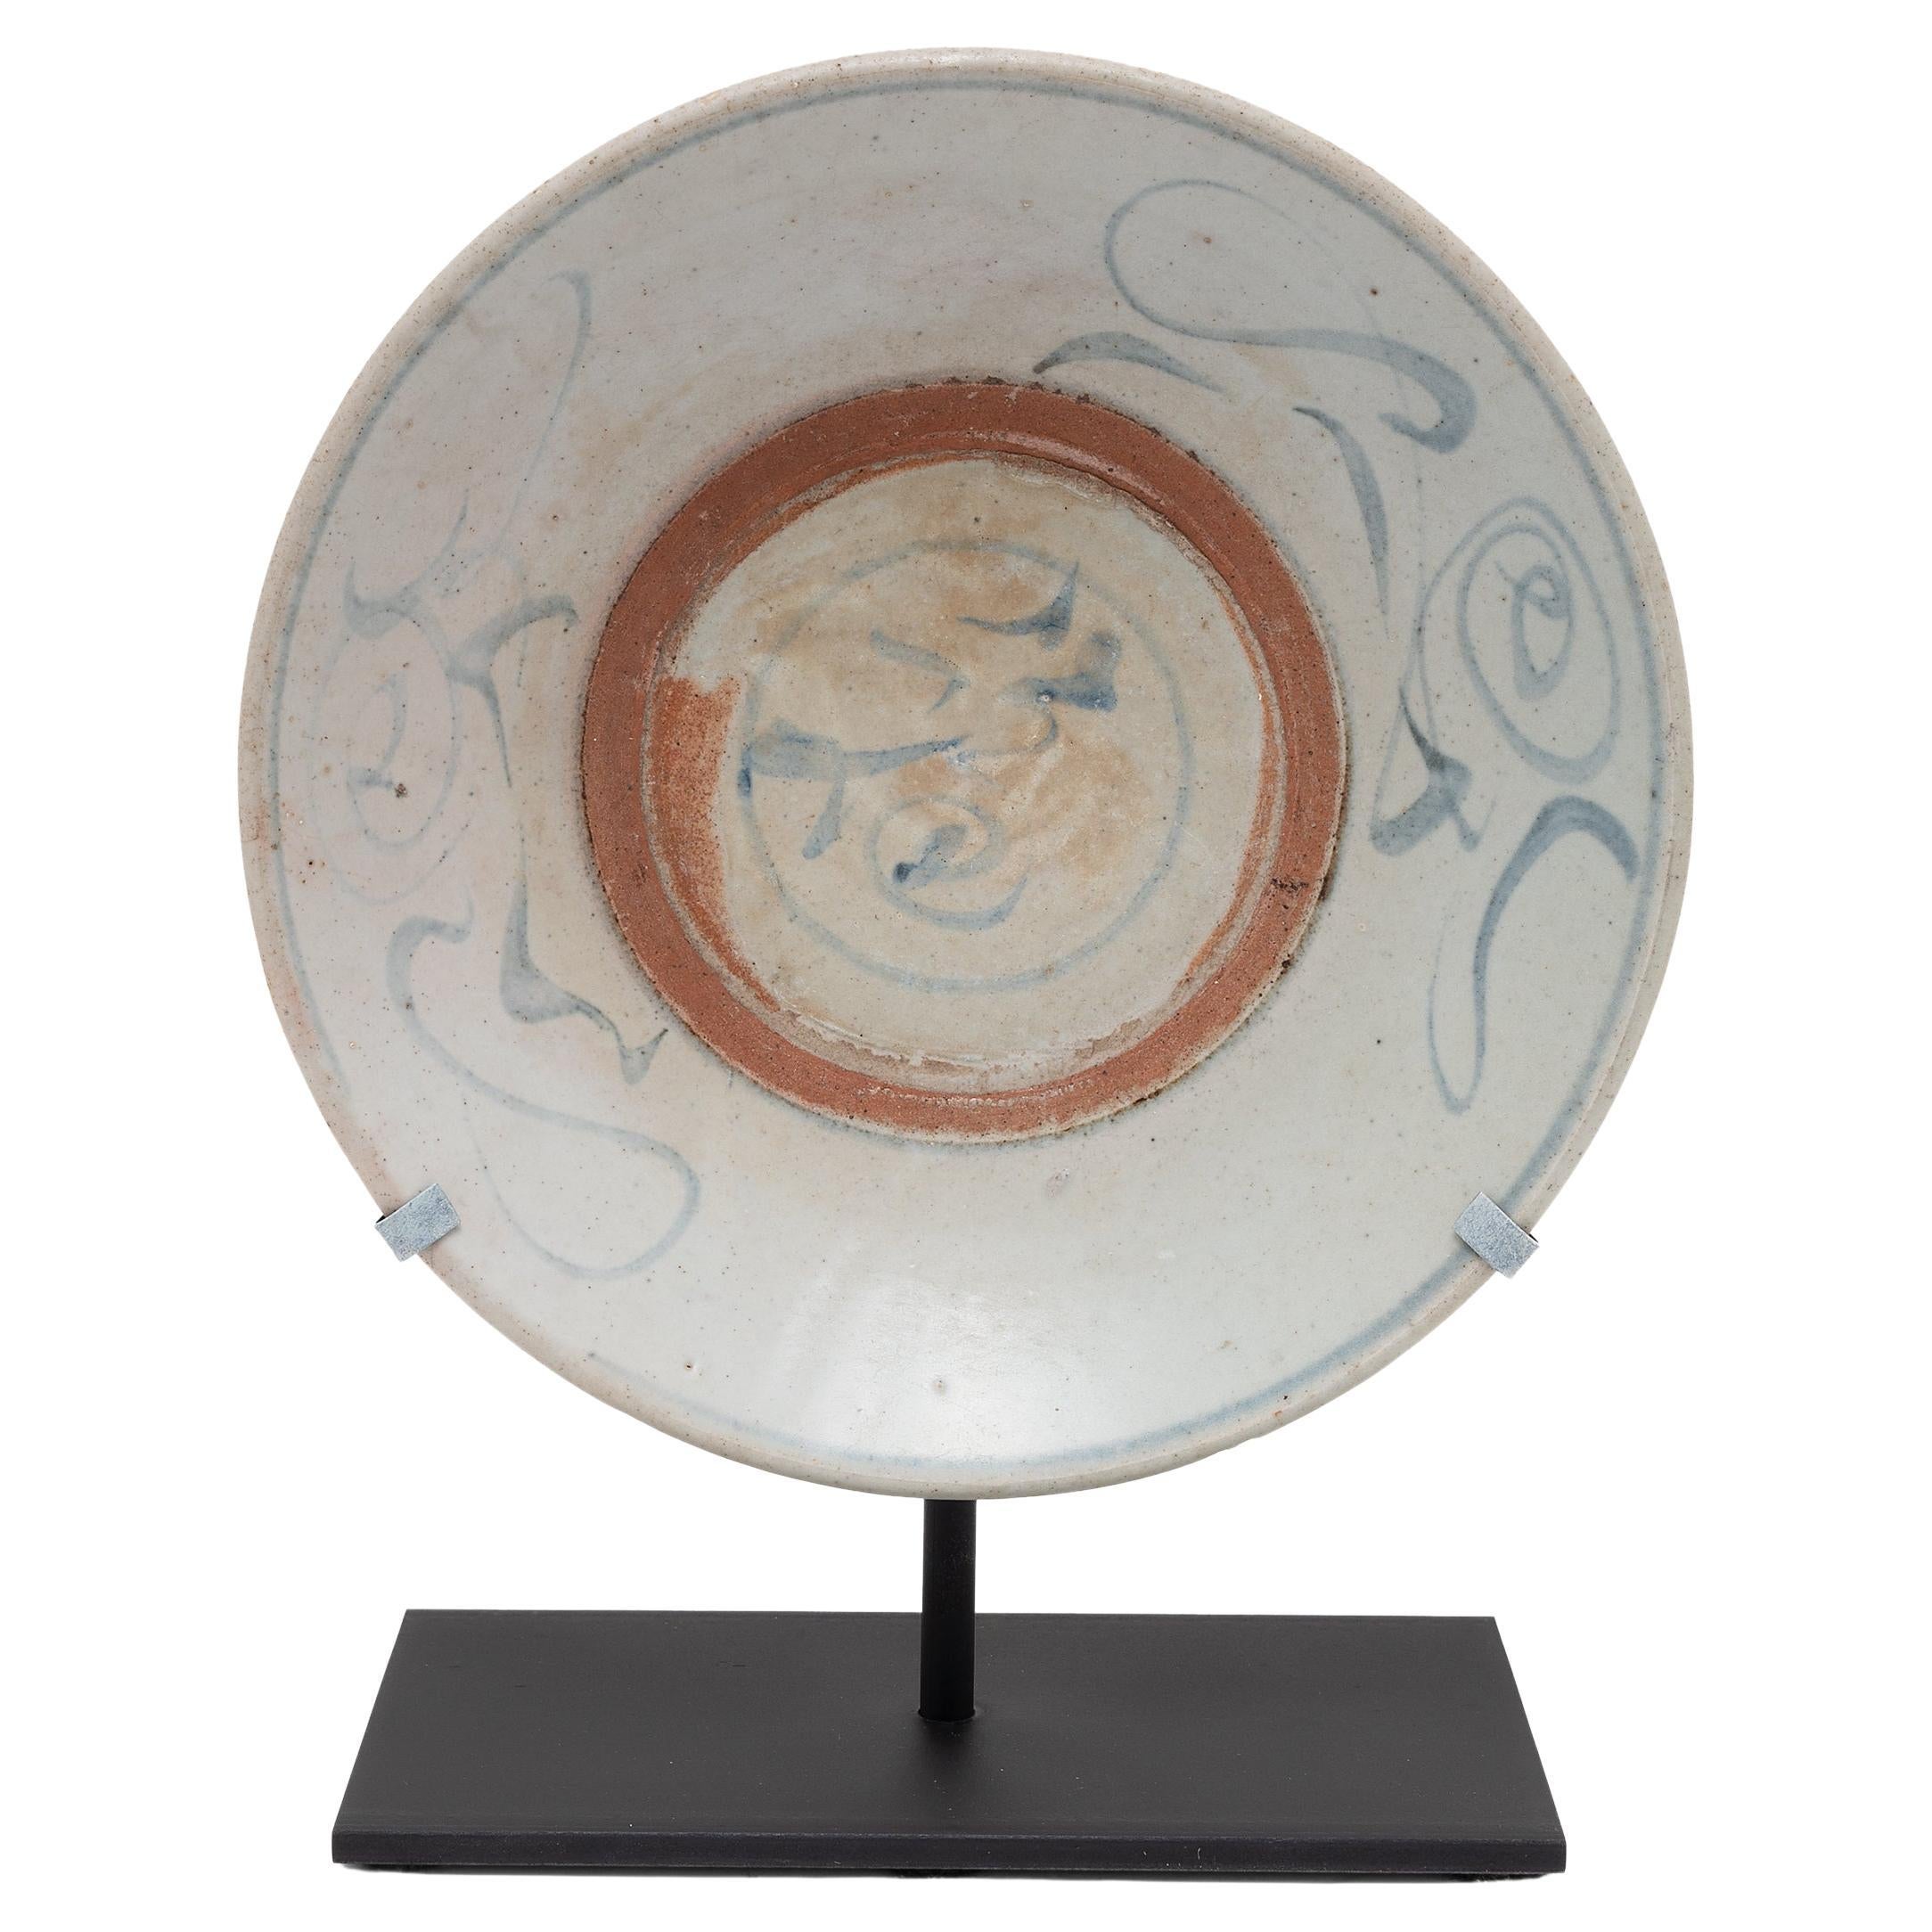 Provincial Chinese Blue and White Plate, c. 1850 For Sale